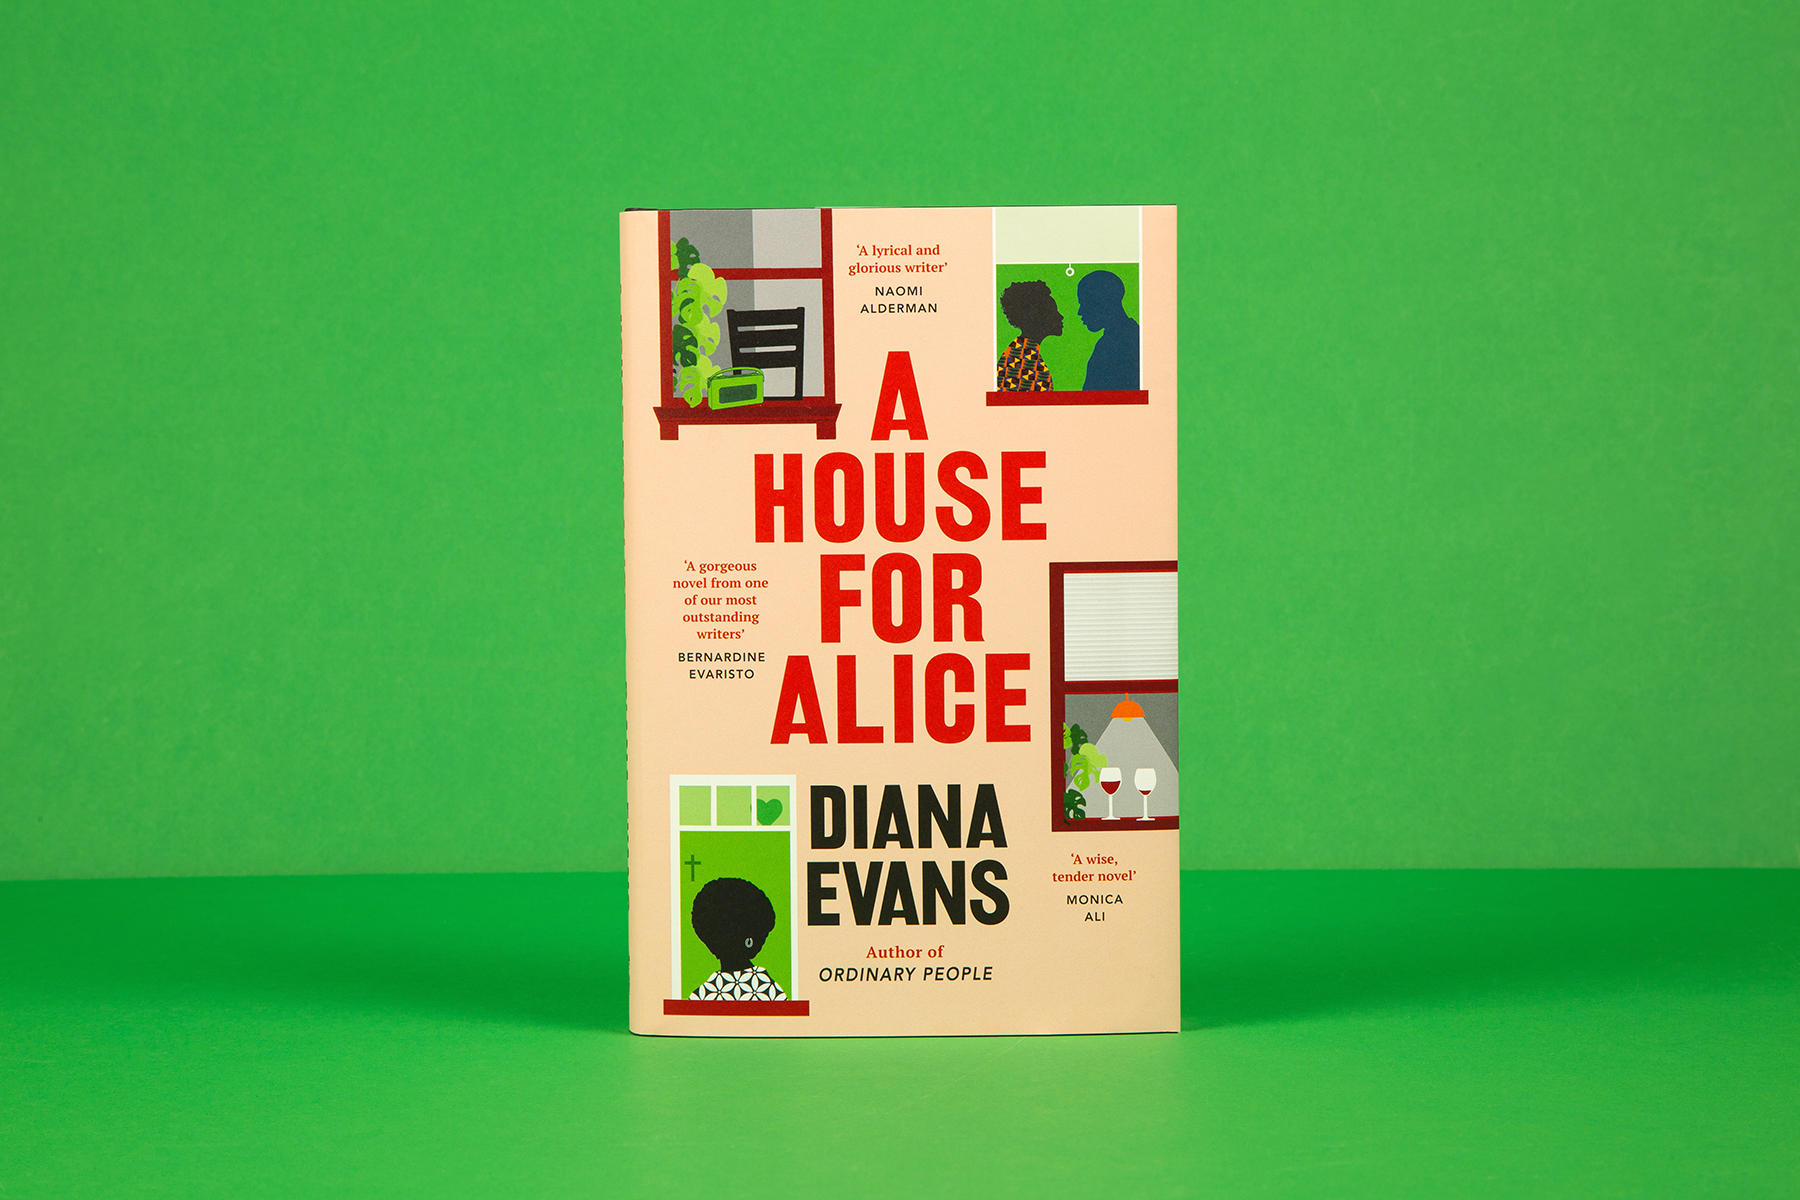 Photograph of book, A House for Alice by Diana Evans, standing upright against a green background.